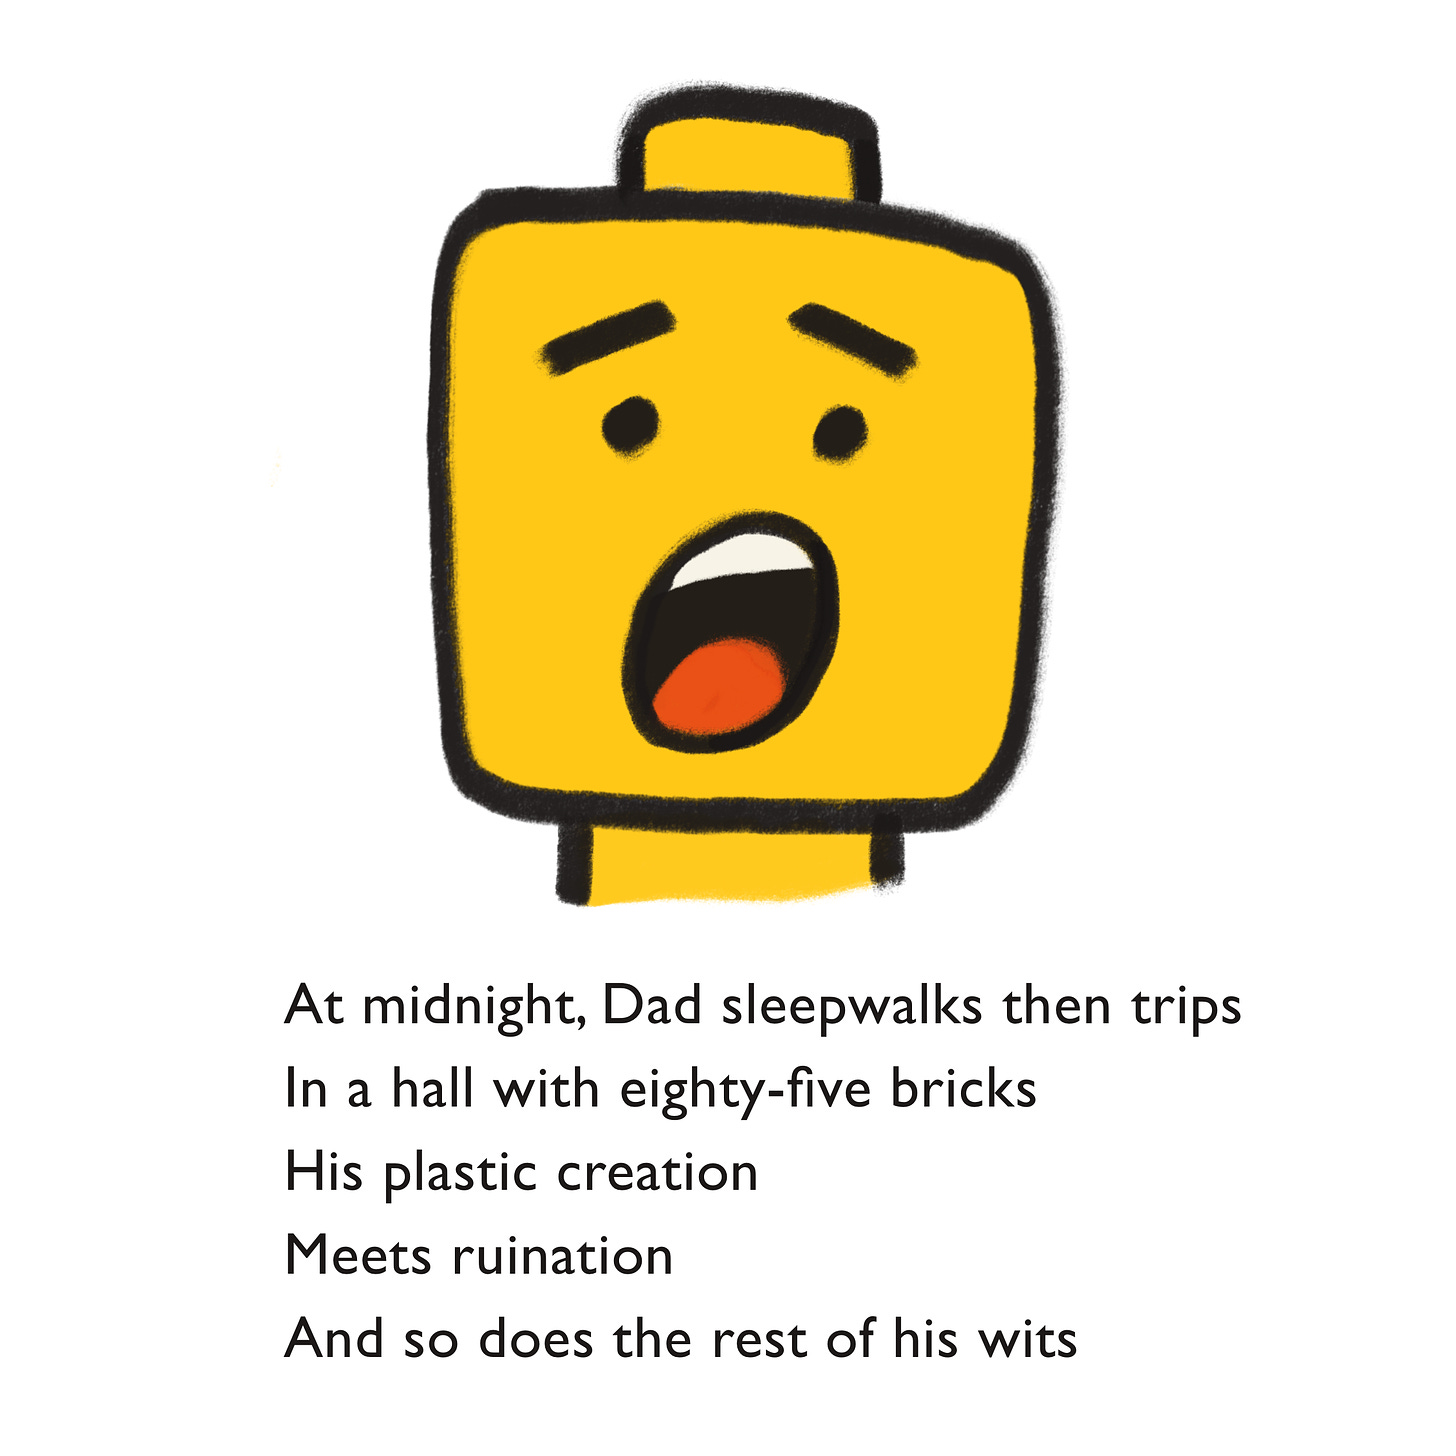 A hand-drawn illustration of a yellow LEGO head figure with a surprised face.